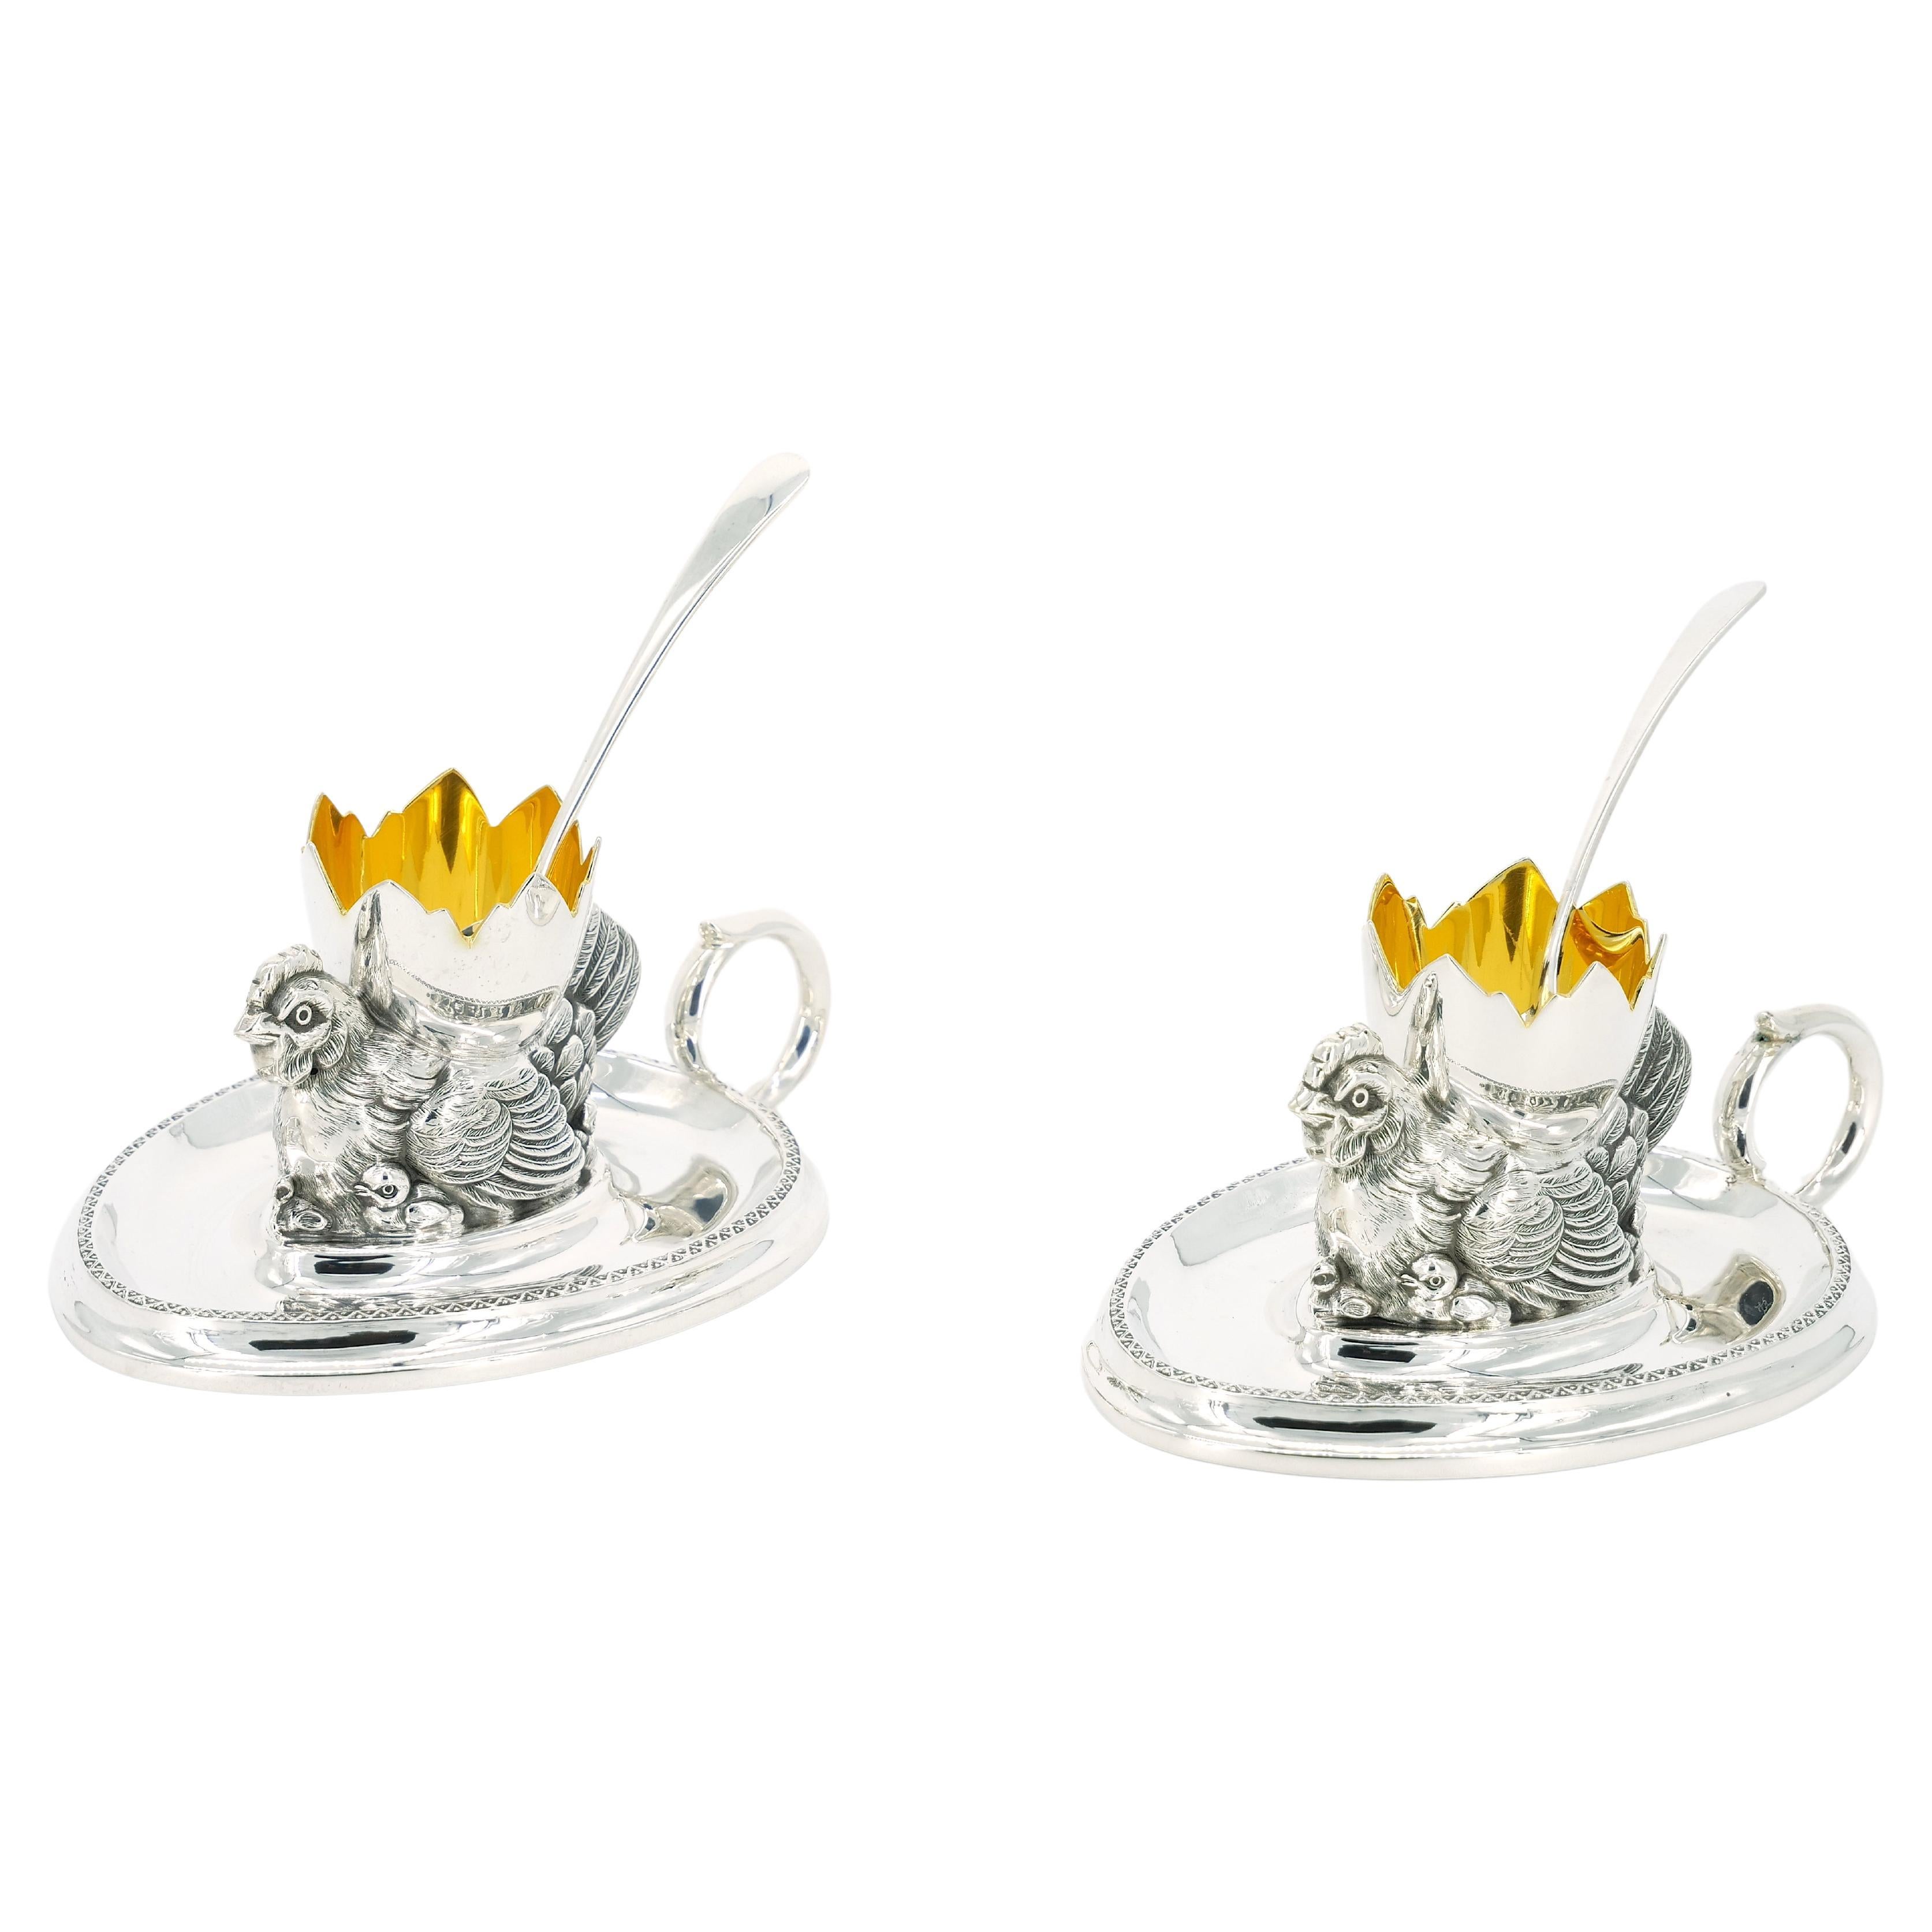 Pair Silver Plate Tableware Chicken Figurine With soft Boiled Egg Holder / Spoon For Sale